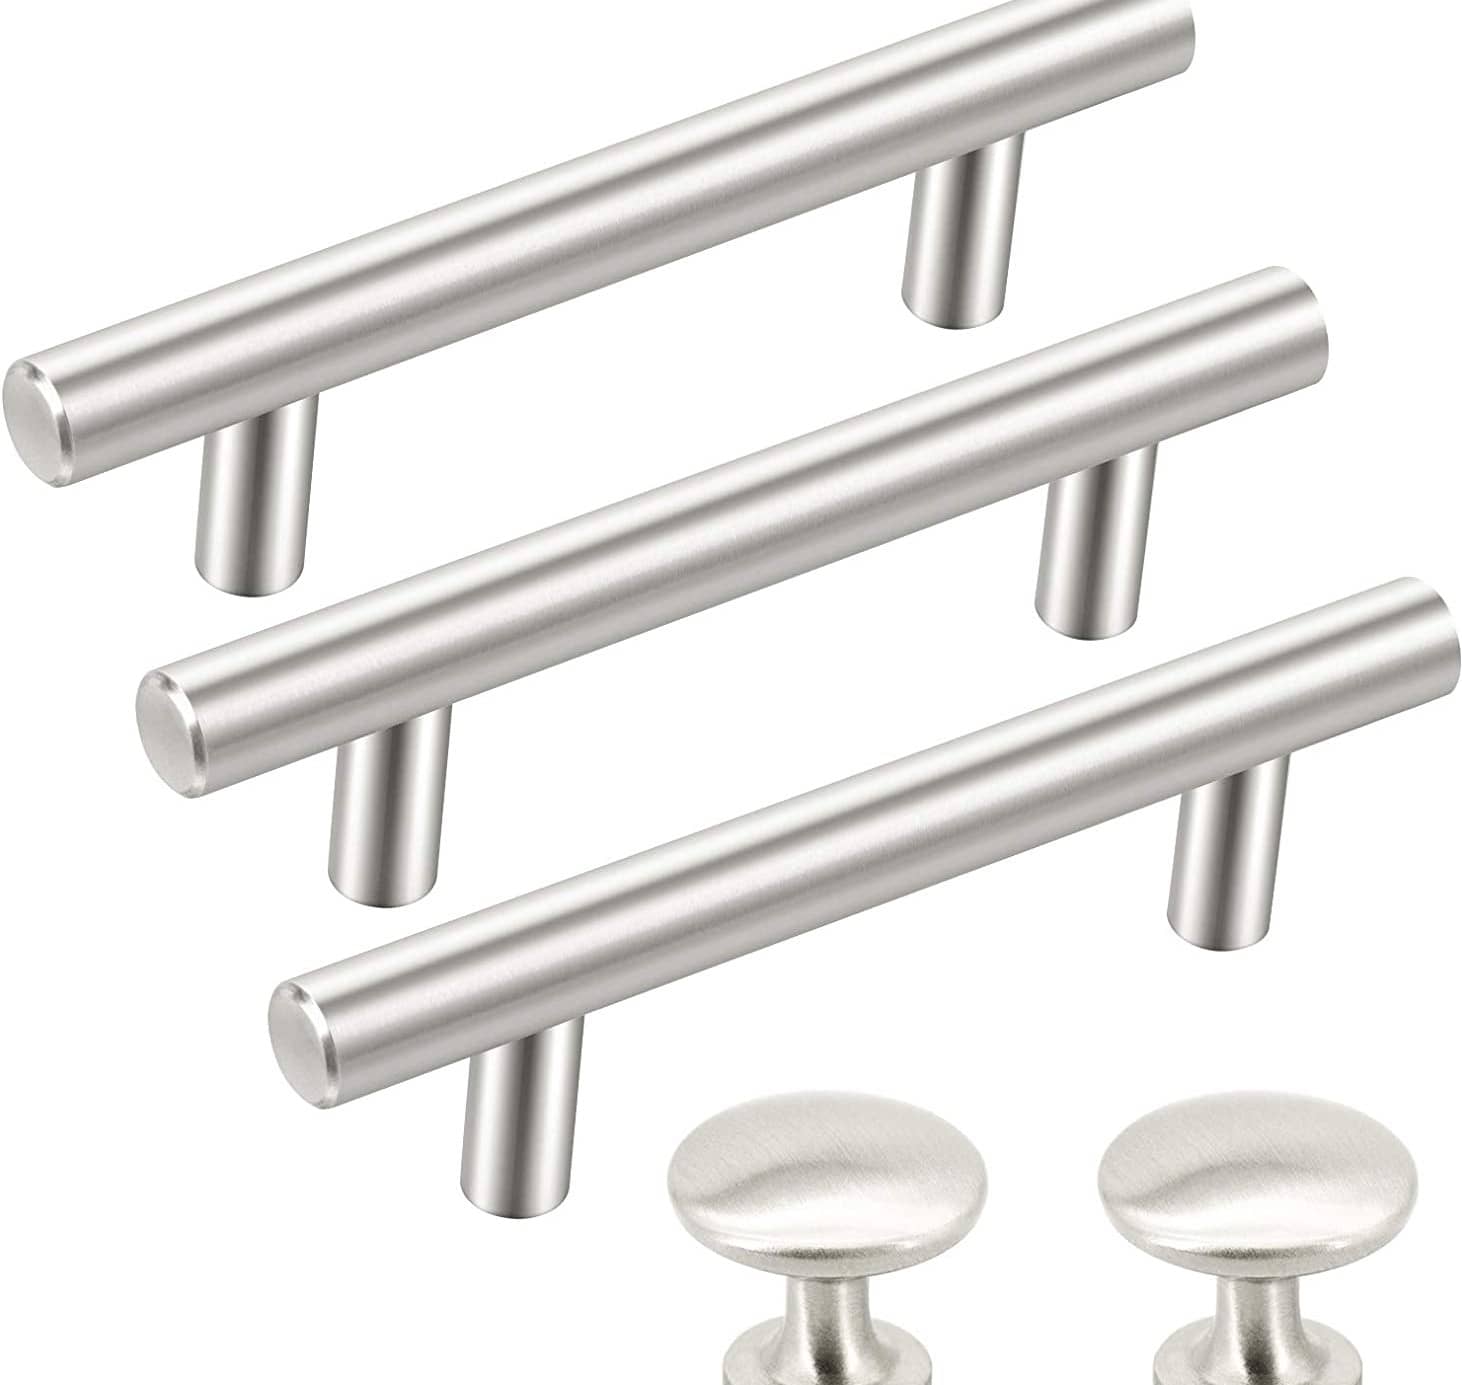 SUNRIVER-Drawer-Pulls-and-Knobs-Handles